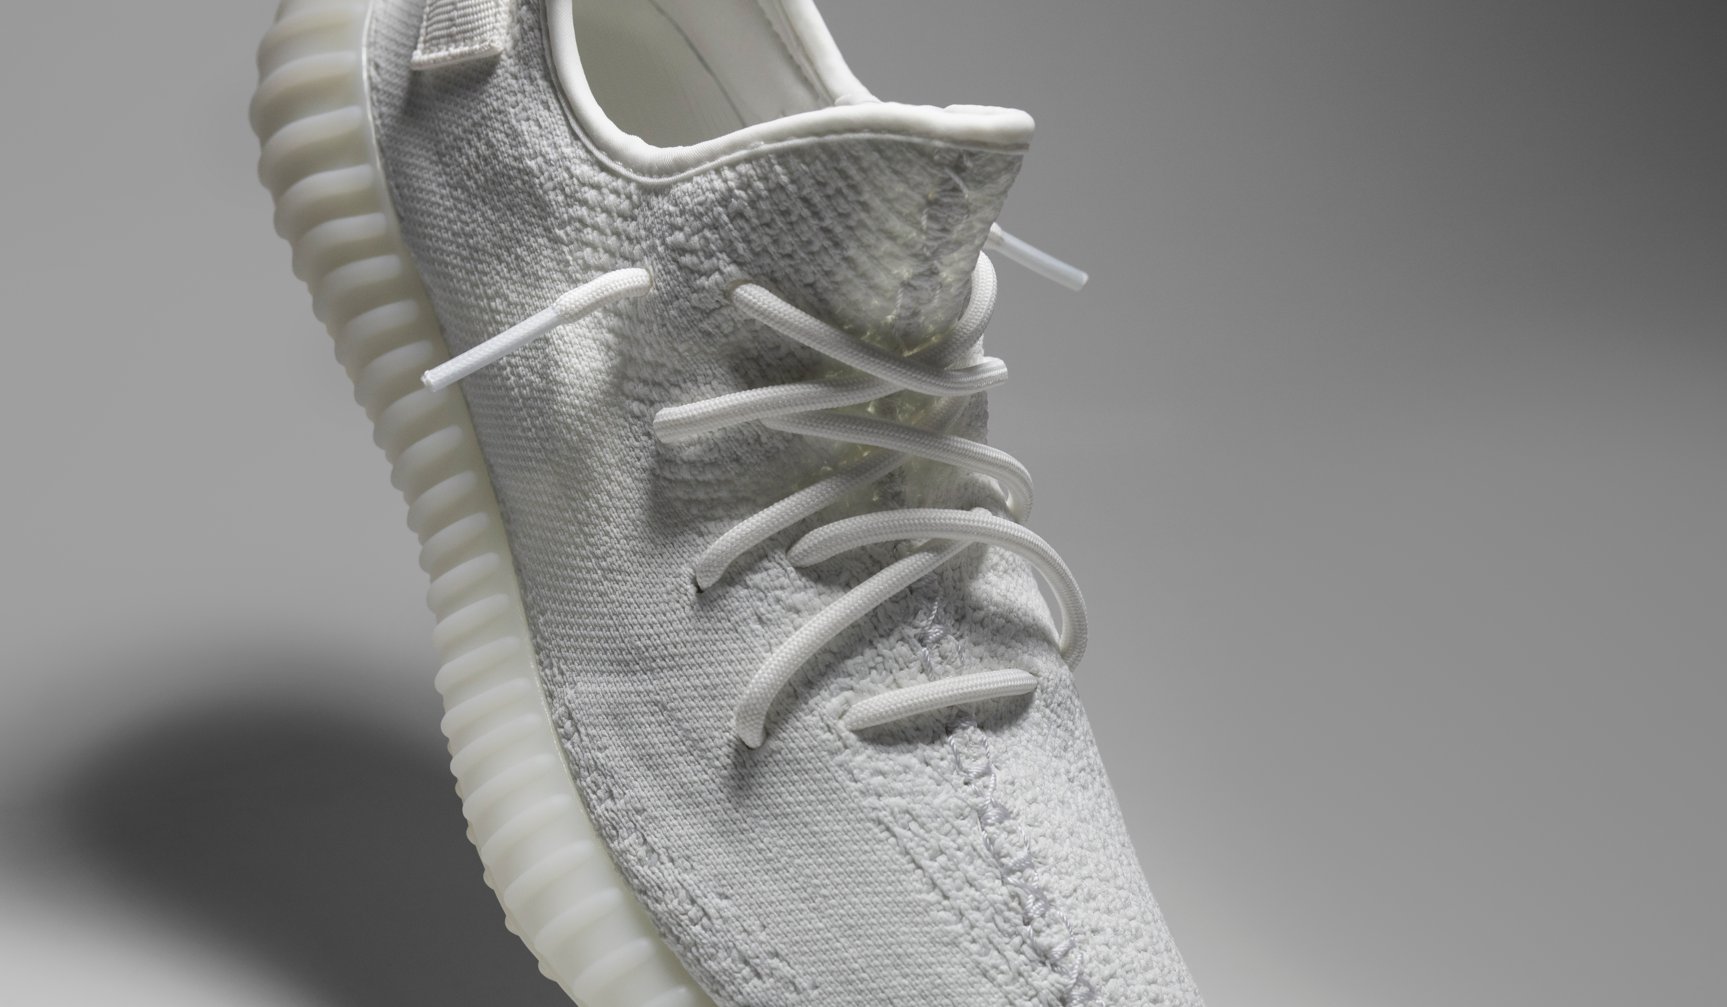 participar Unir Firmar GOAT on Twitter: "Shop the 'Triple White' collection to add kicks like the  new Yeezy Boost 350 V2 'Cream White' to your lineup:  https://t.co/NlGAvZFxJO https://t.co/yFJTeKude7" / Twitter